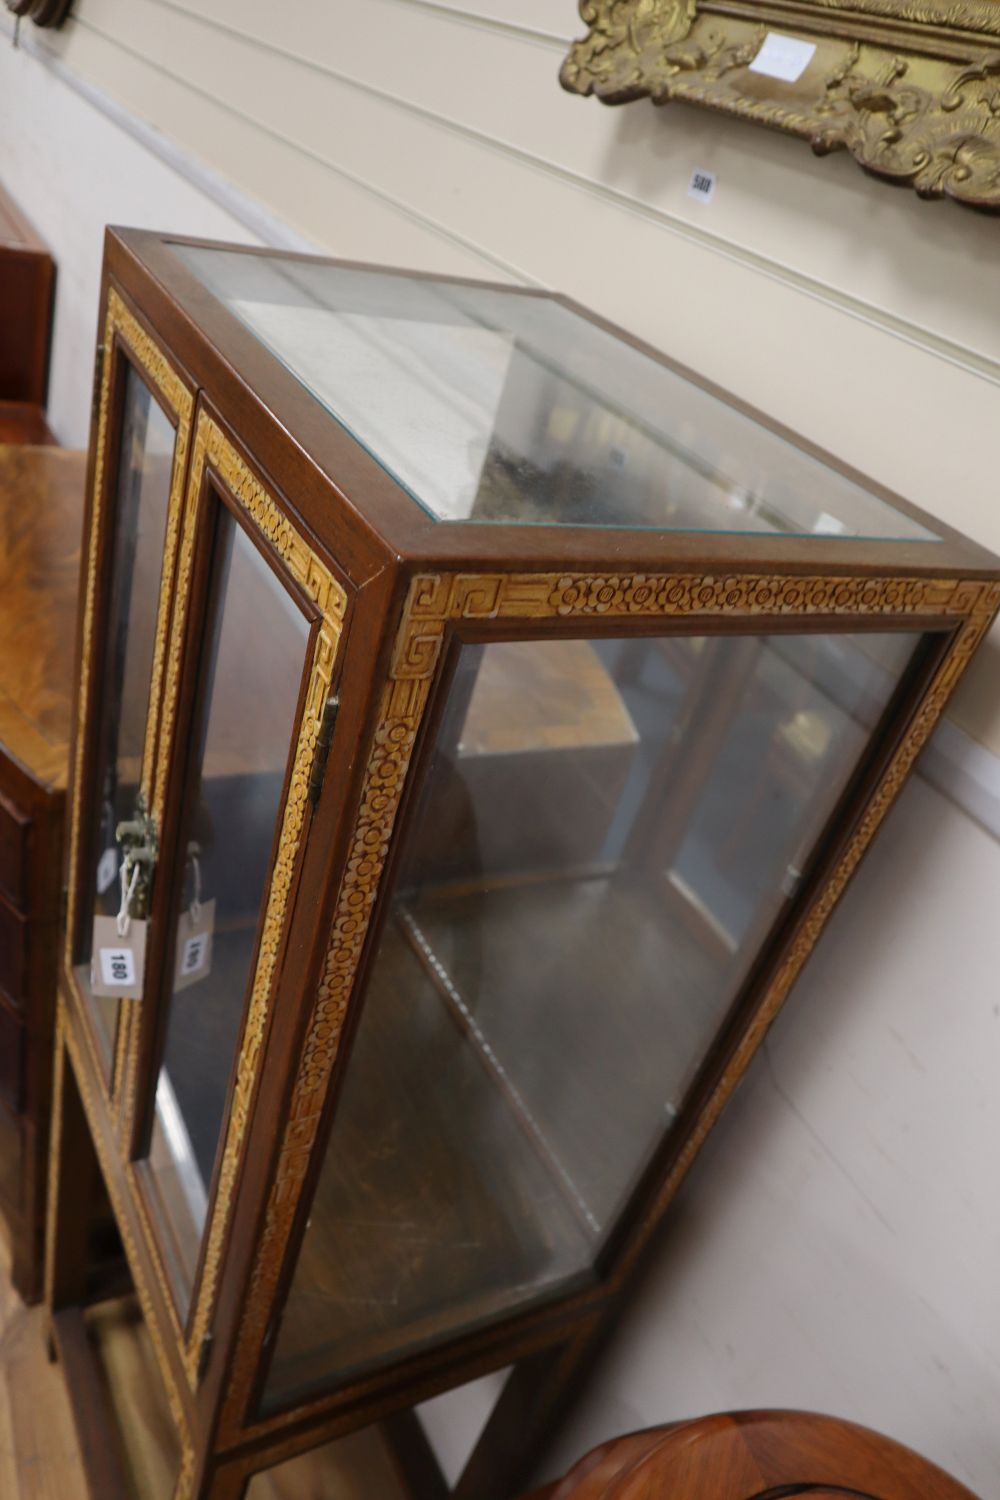 A Chinese hardwood display cabinet, width 51cm, depth 38cm, height 143cm